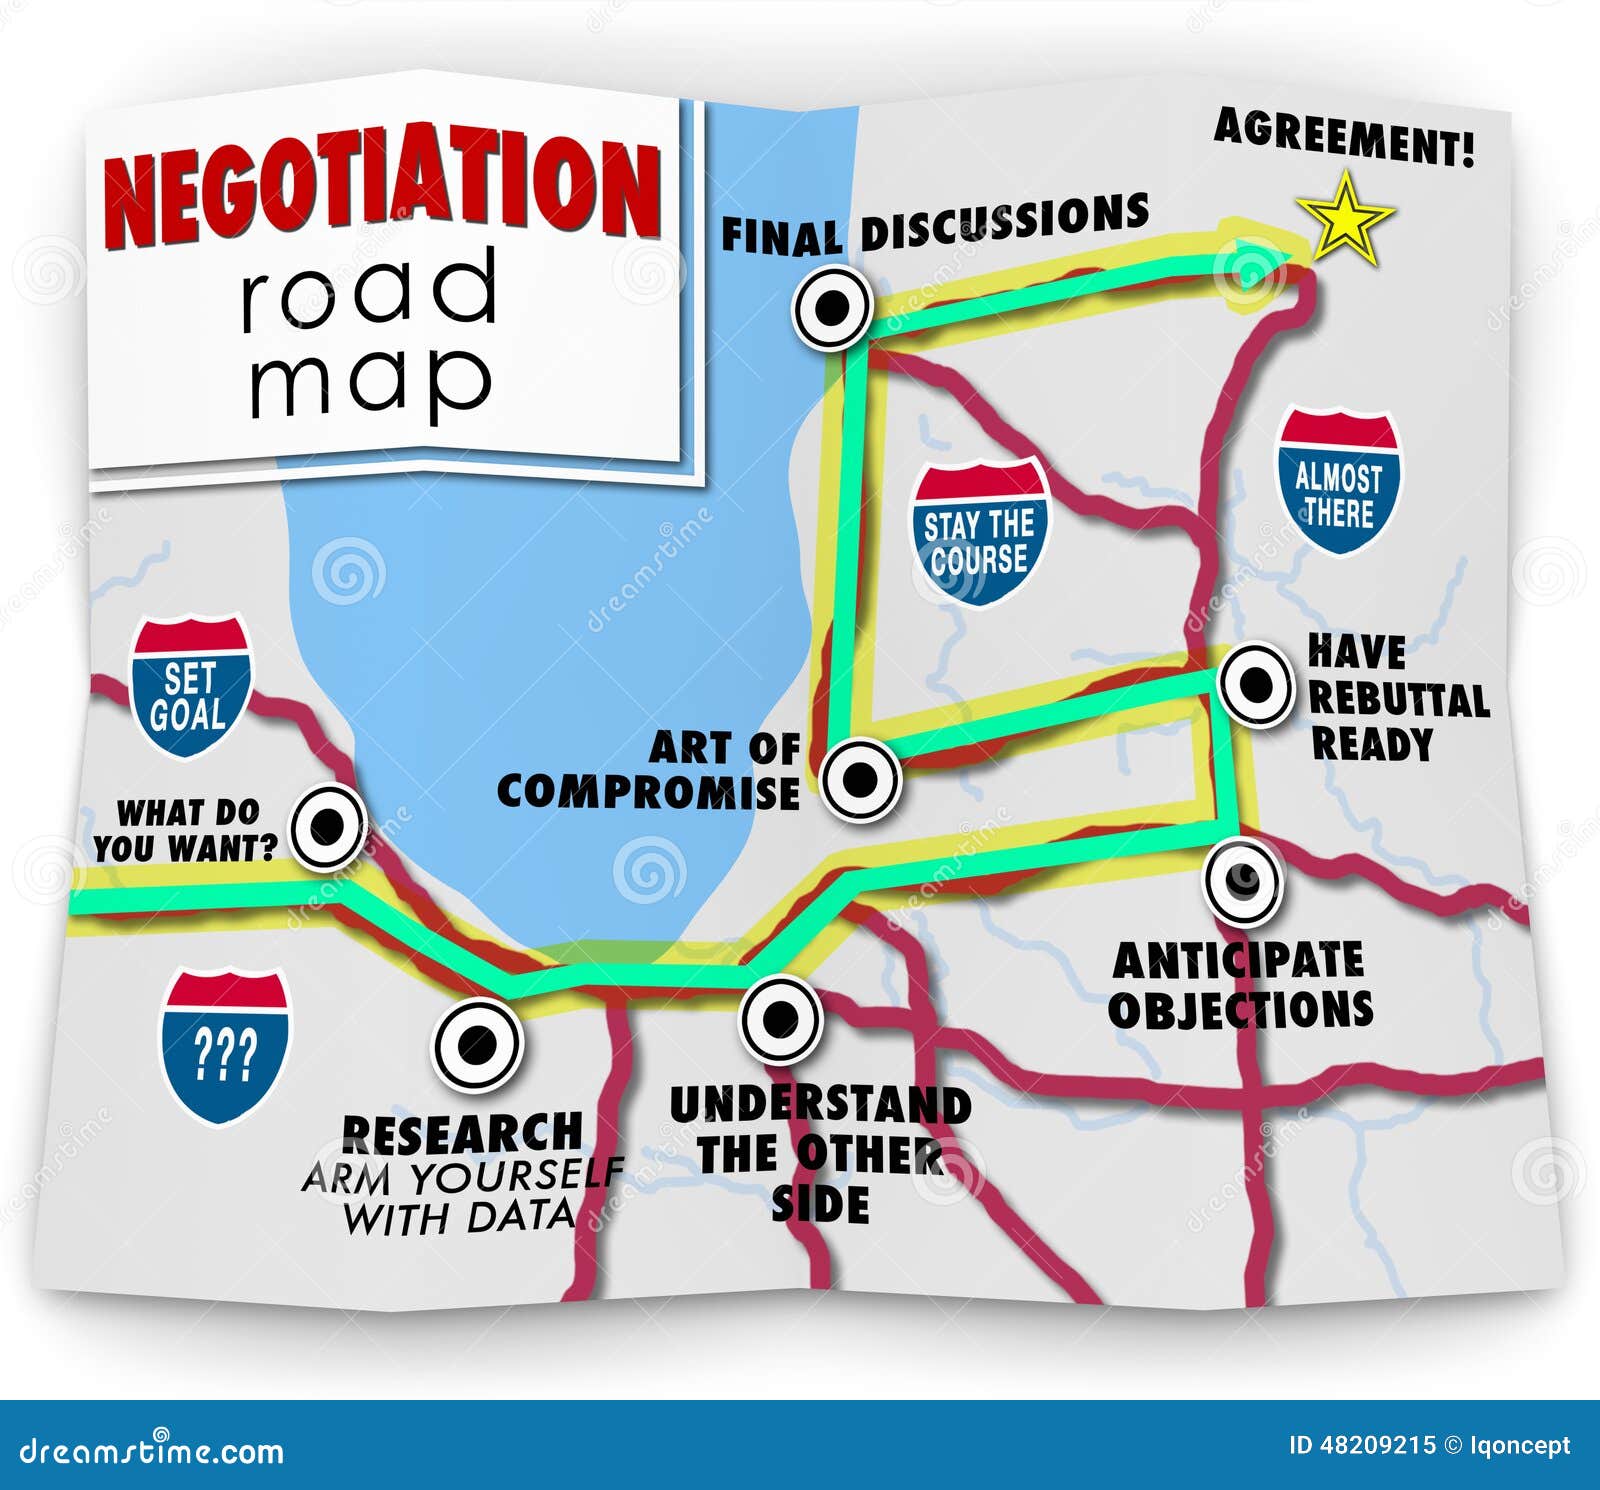 negotiation road map directions agreement common benefit goal